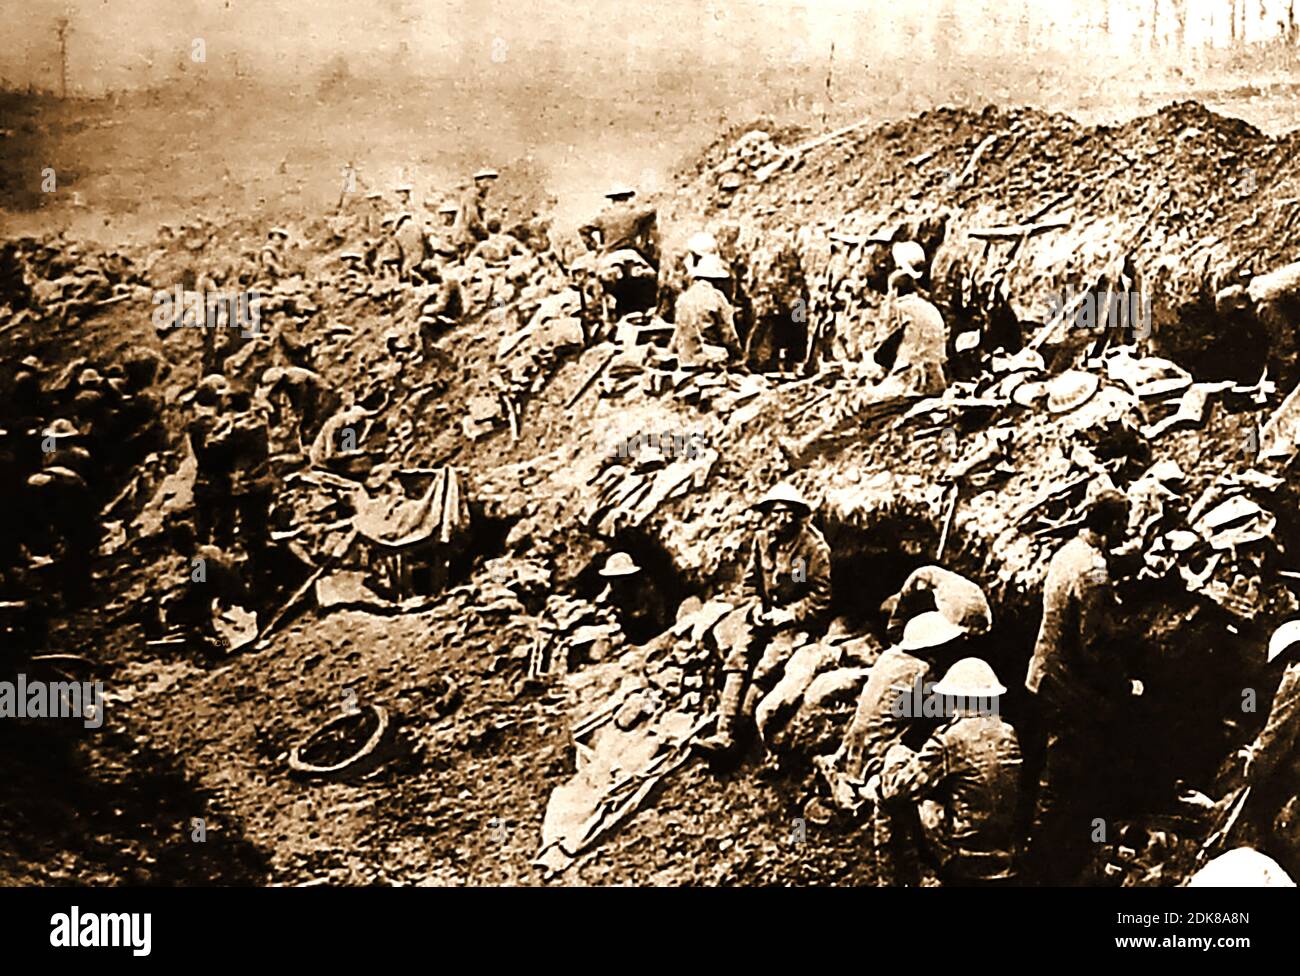 WWI on the Somme - British soldiers withdrawn from the front line after a battle, rest in abandoned trenches. After completing their stint at the front line, units were sent to the rear of the battlefield for rest, and later for recreation and further training in near 'normal' conditions far removed from the hardship and horror of the front line trenches. Stock Photo